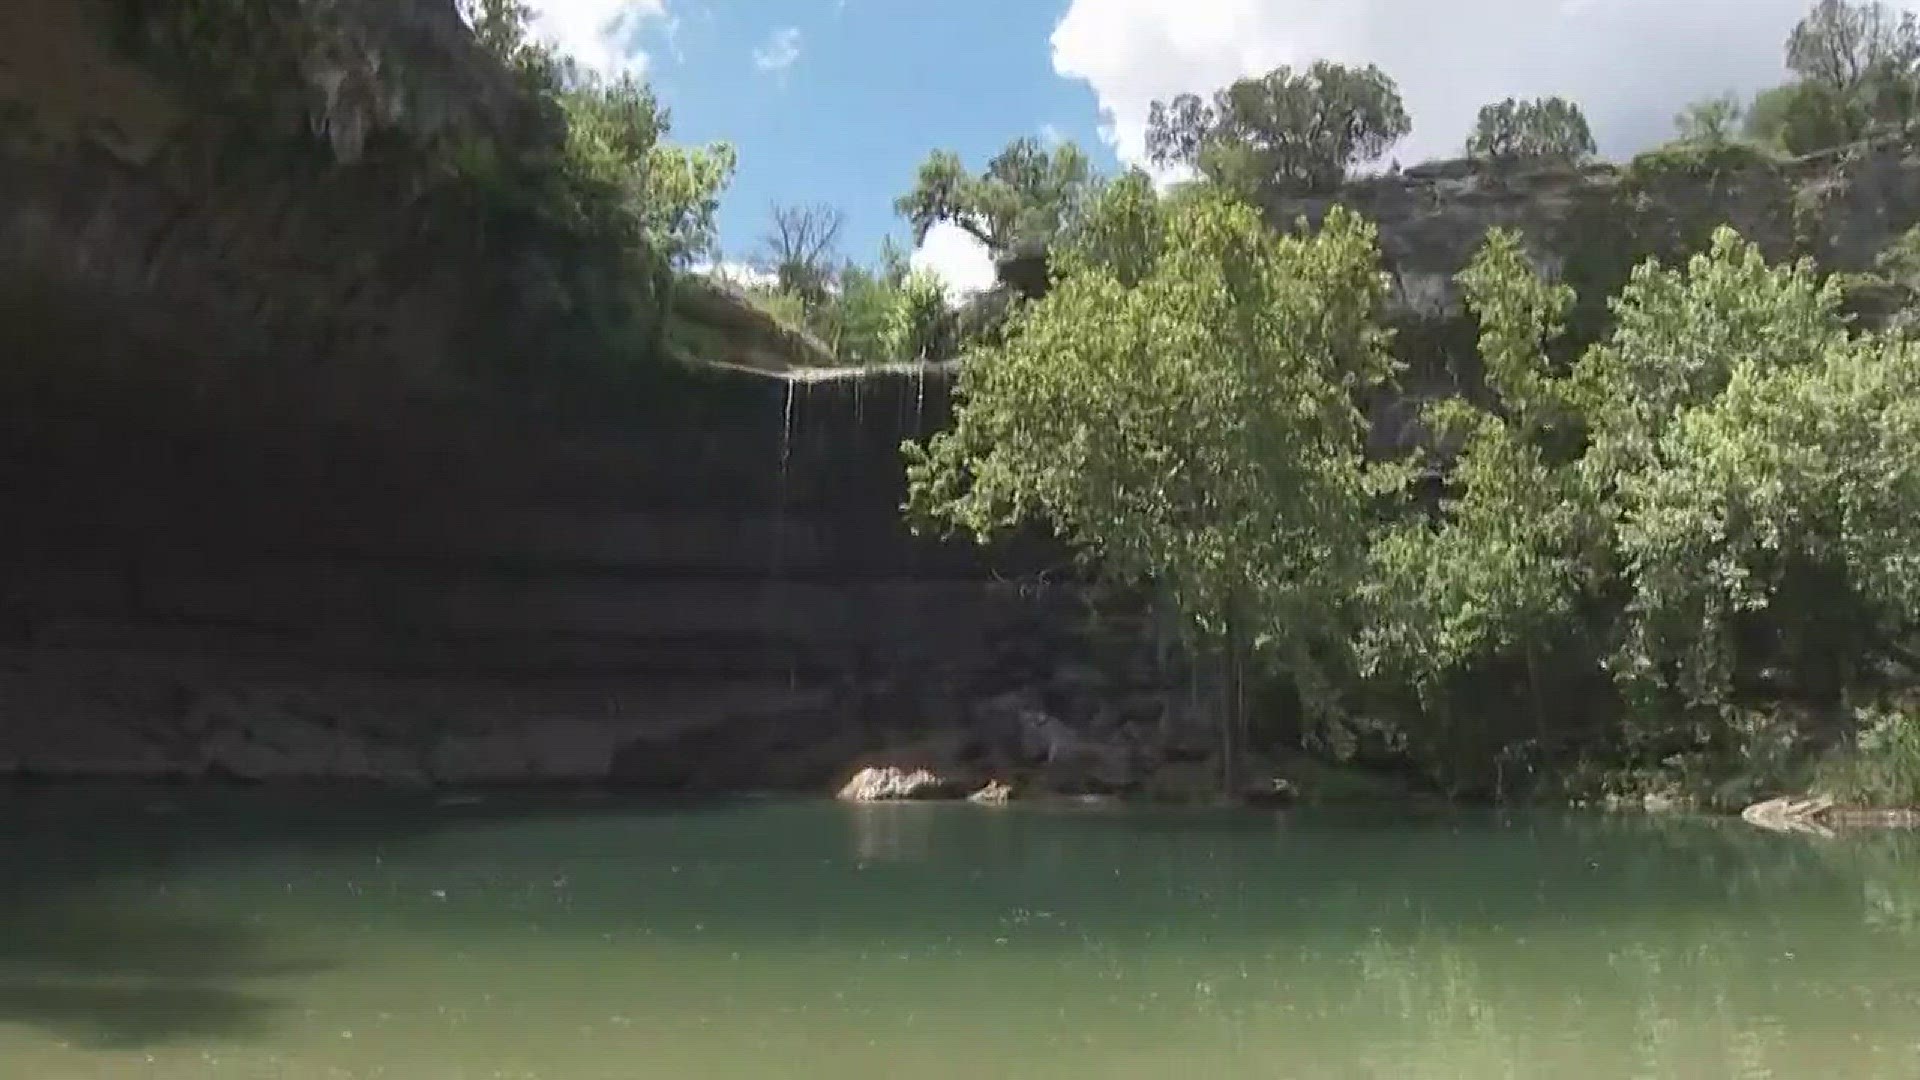 Safety changes coming to Hamilton Pool